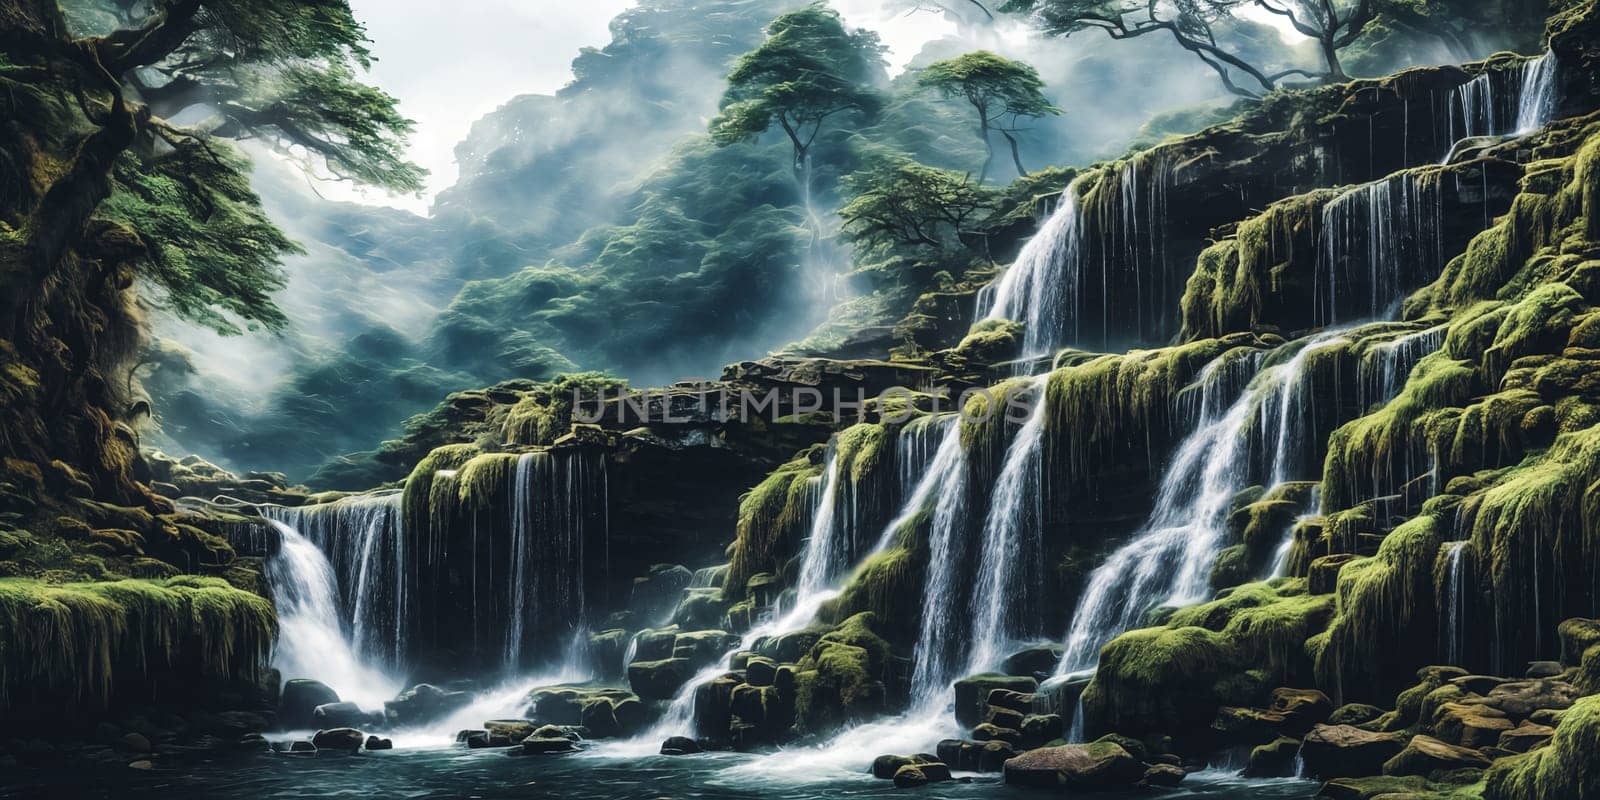 Scene Setting. Majestic waterfall cascading down a rocky cliff, surrounded by lush greenery.